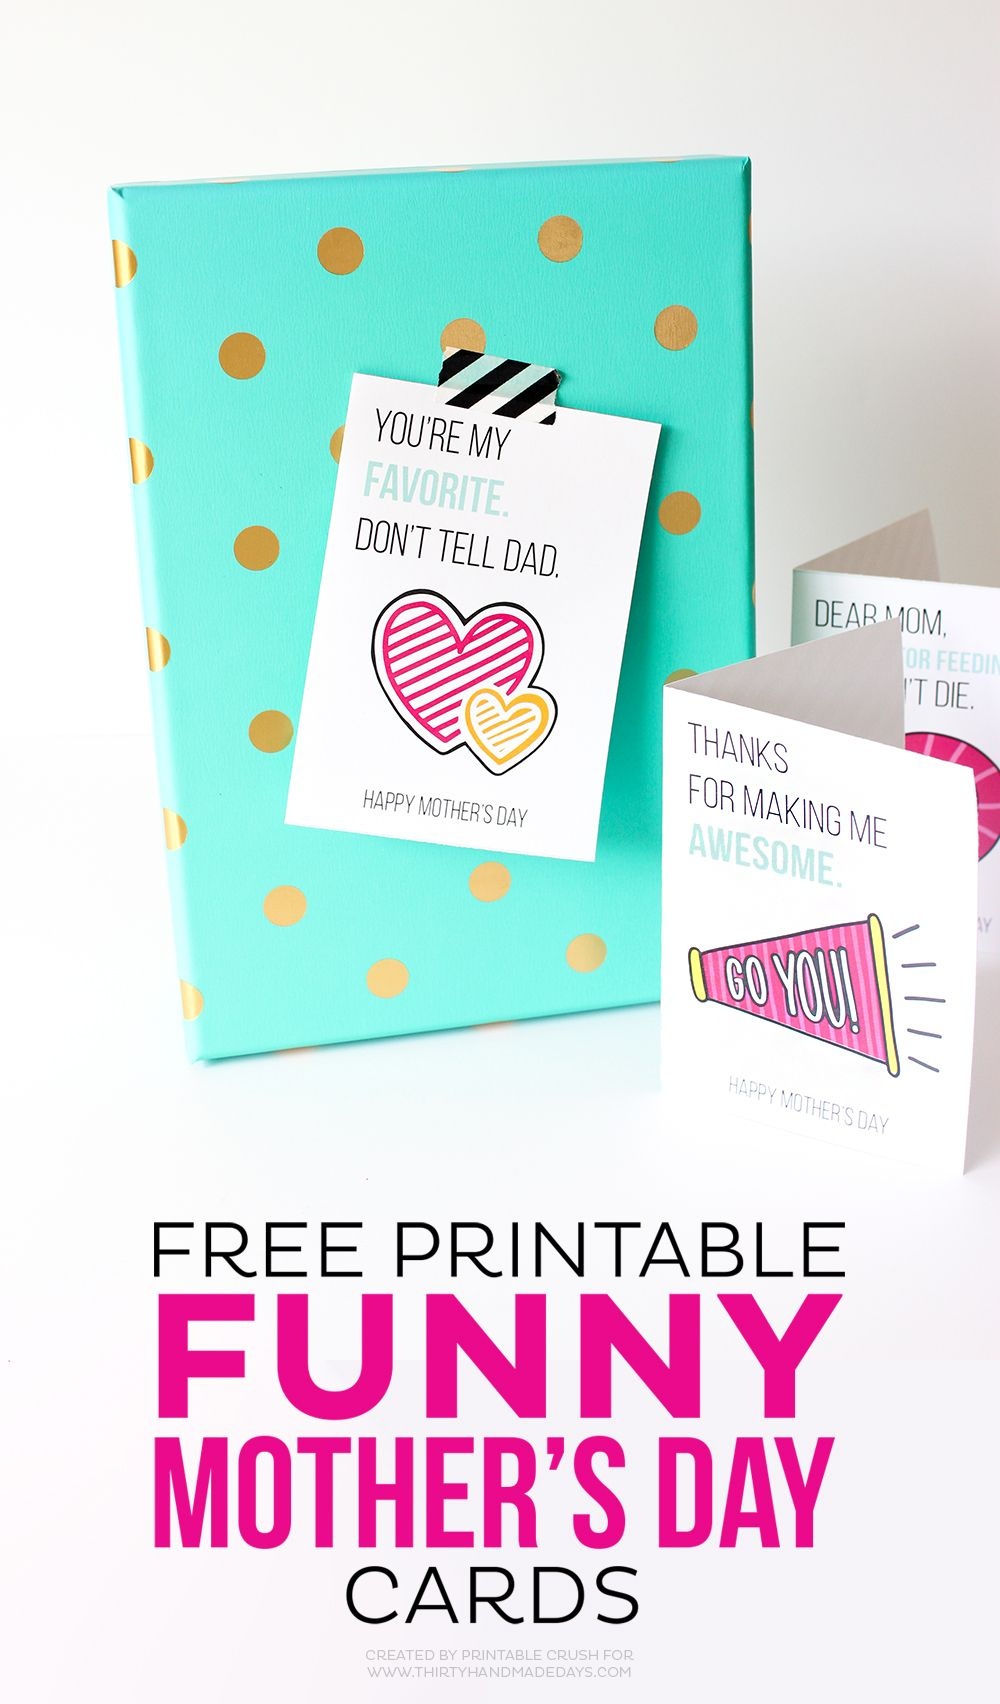 Printable Funny Mother&amp;#039;s Day Cards | Art + Graphic Design Bloggers - Free Printable Funny Mother&amp;amp;#039;s Day Cards